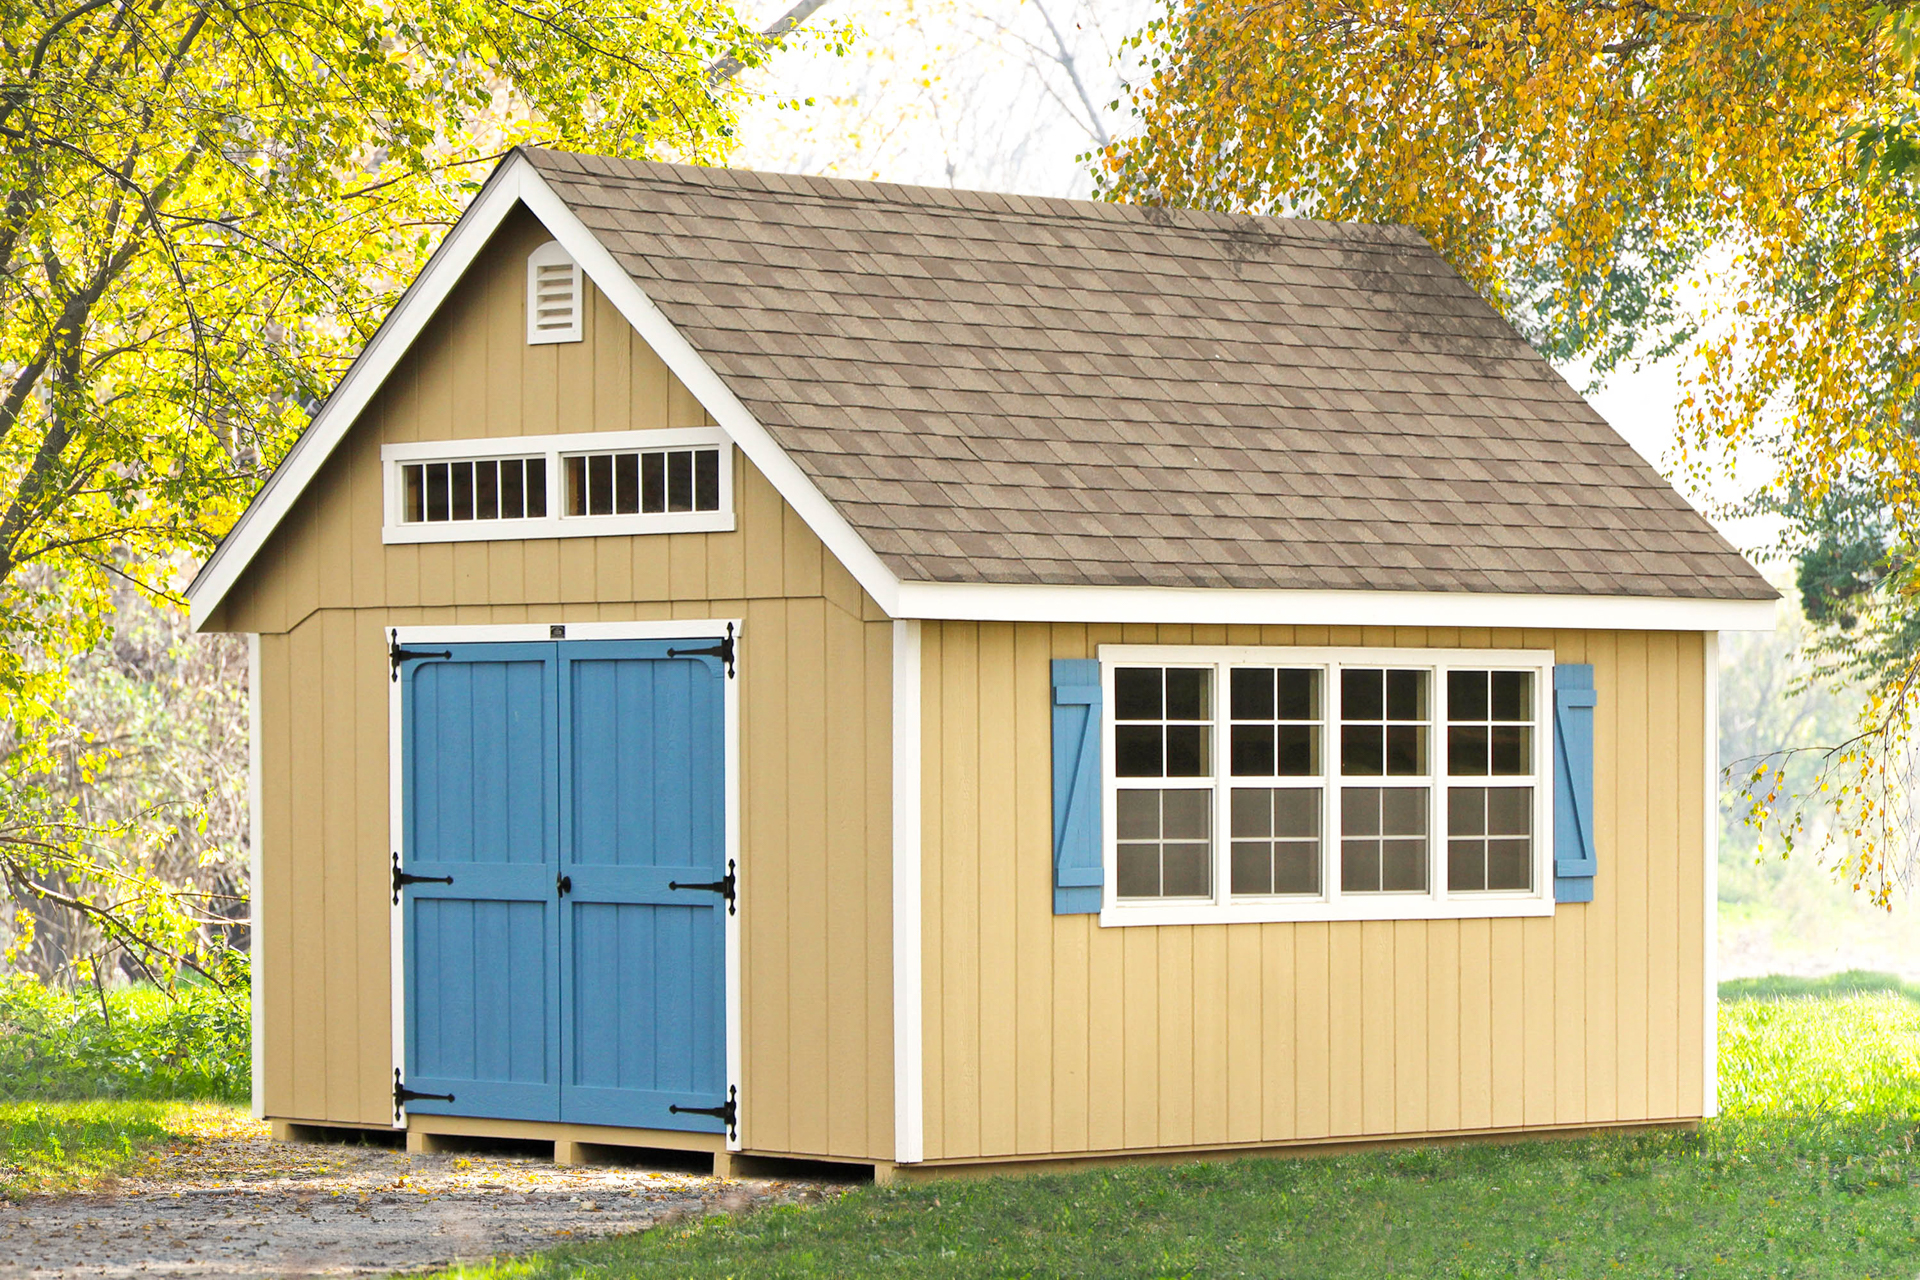 Living in a Shed? An In Depth Guide To Turning A Shed Into A Tiny